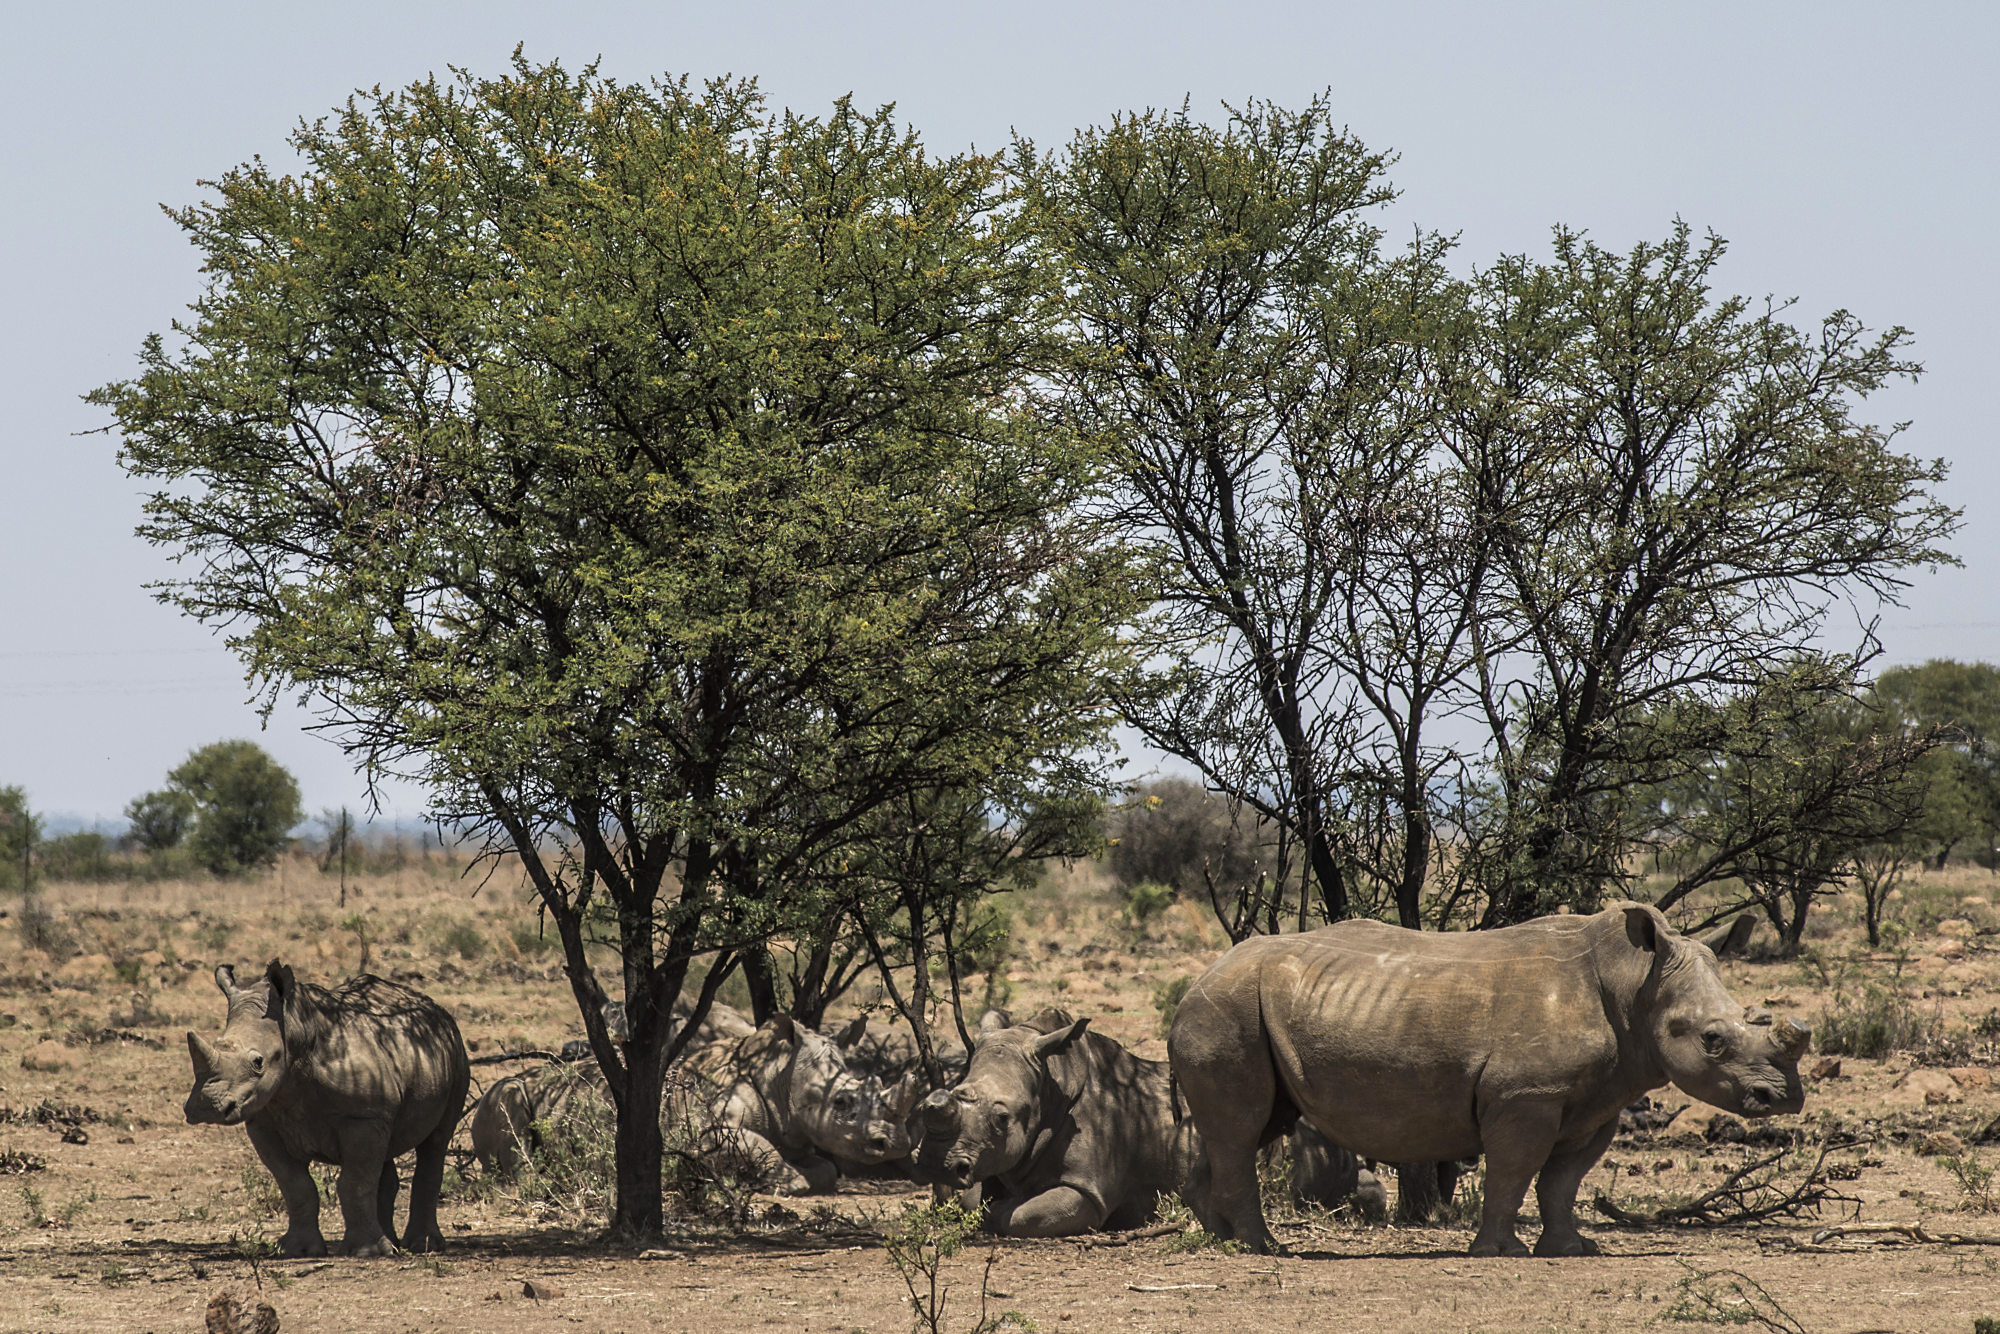 White rhinos shelter from the sun beneath a cluster of trees on a ranch belonging to John Hume in South Africa on Dec. 4, 2015.
